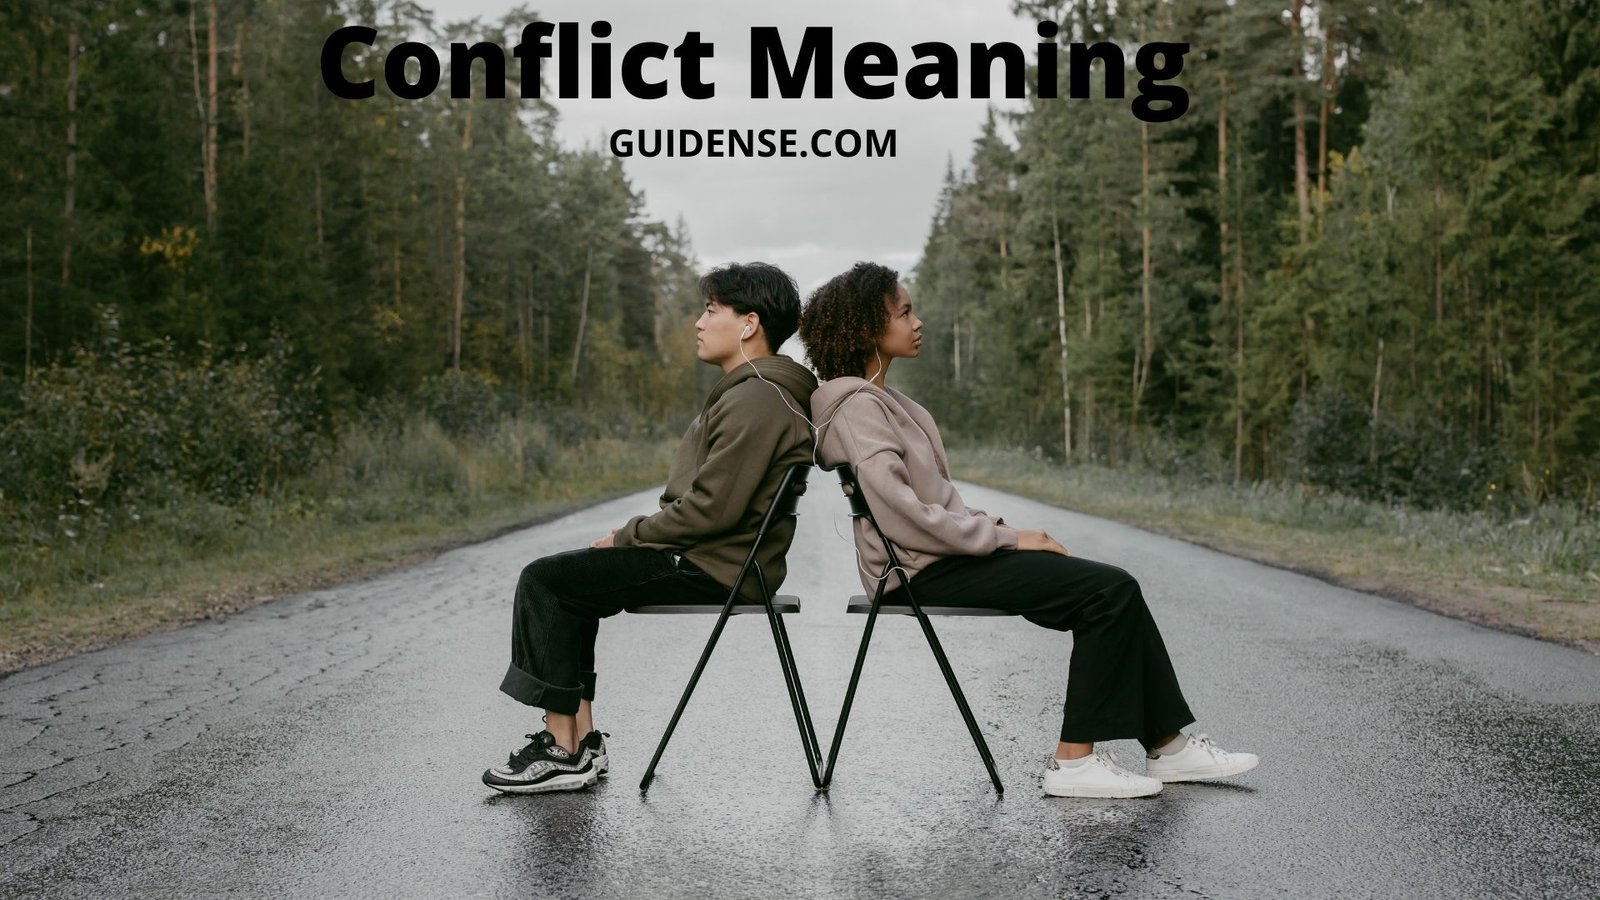 Conflict Meaning